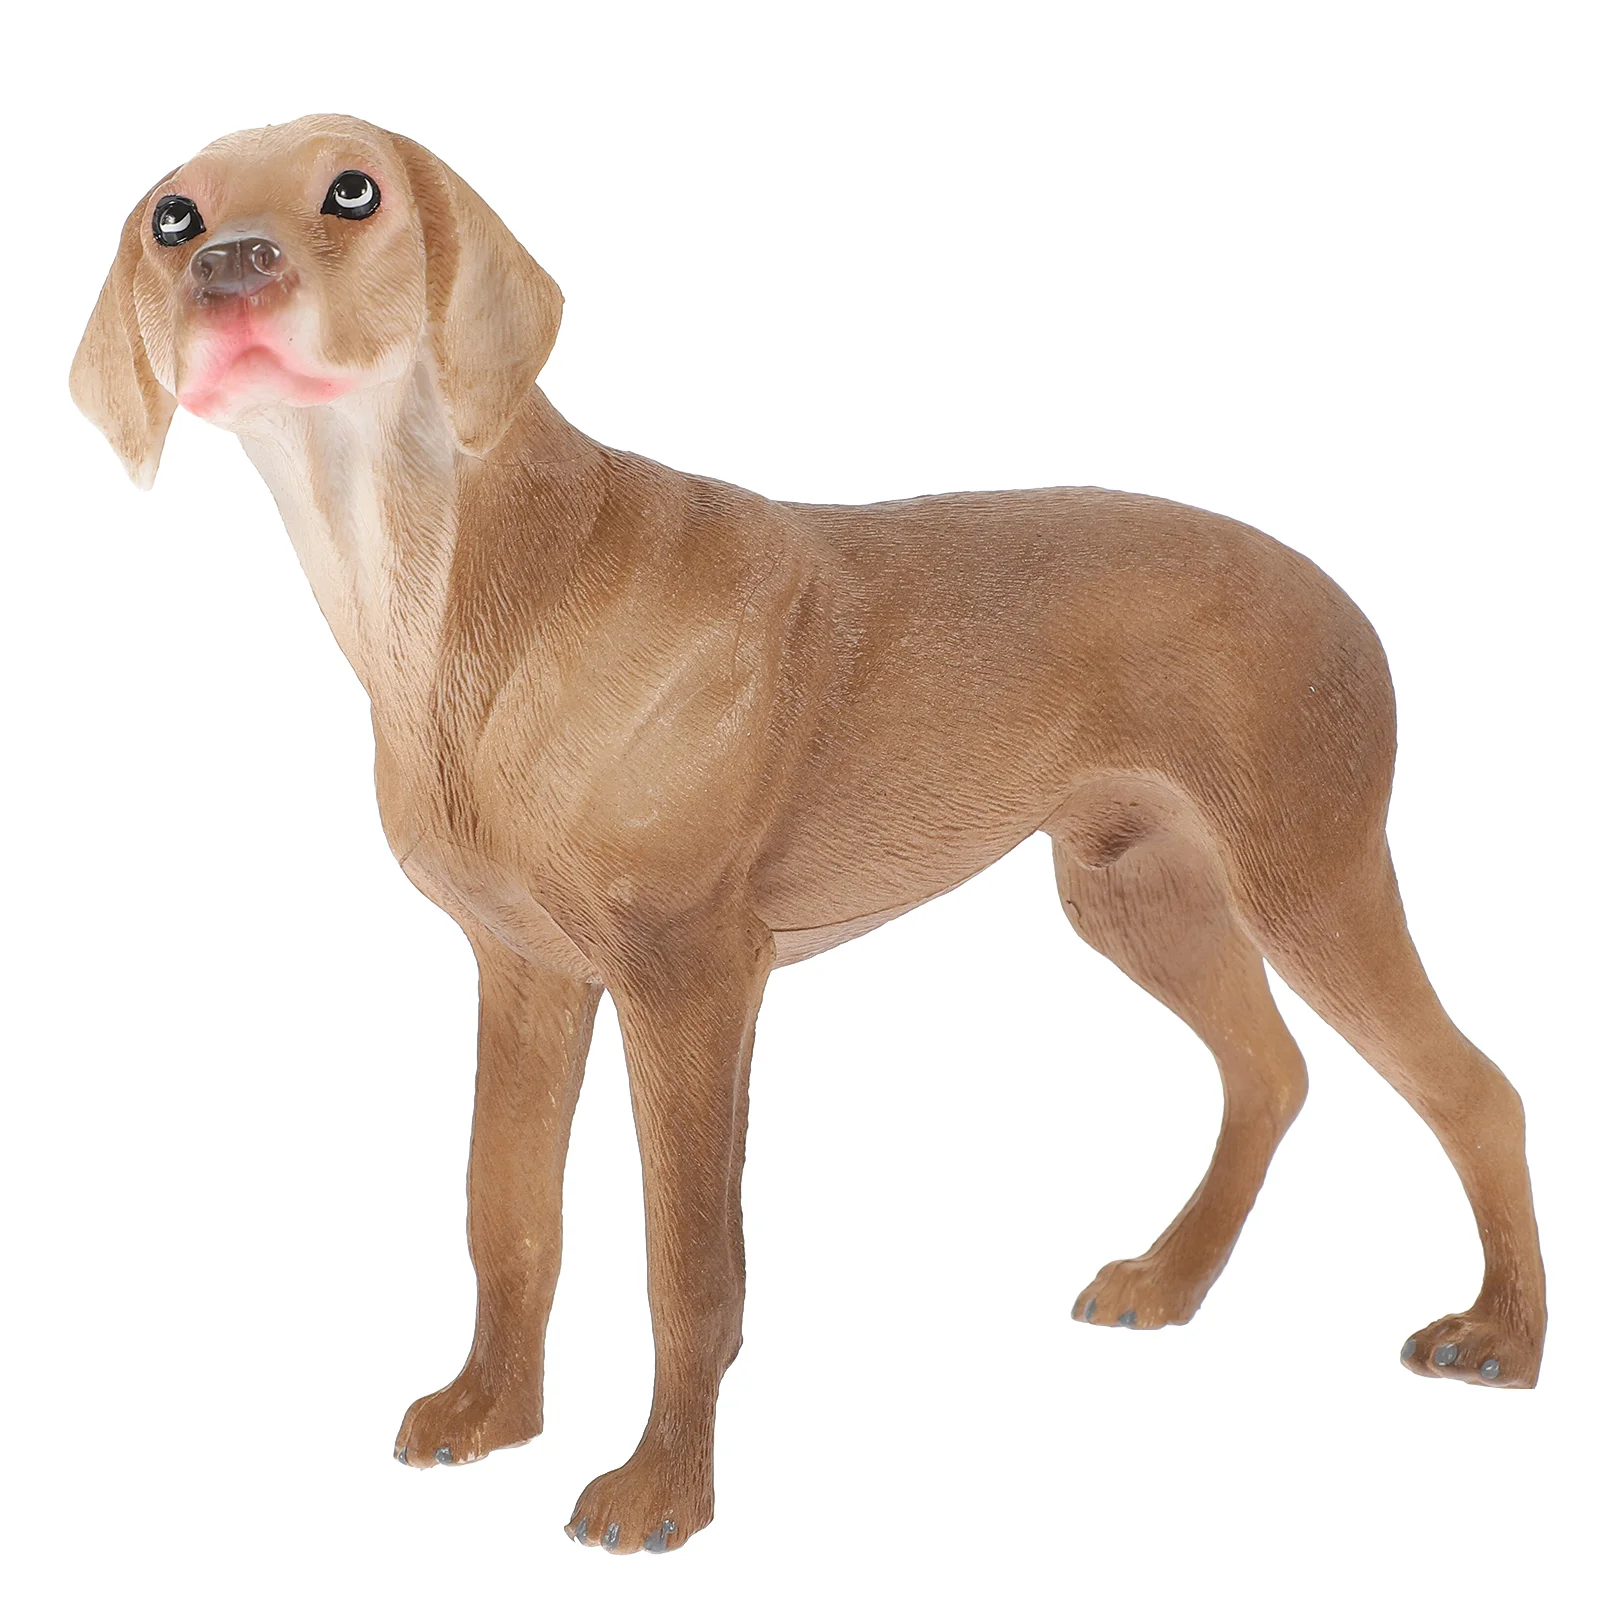 

Simulation Pet Dog Realistic Model Statues Figurines Toy Figure Models For Playing Simulated Craft Ornament Decor